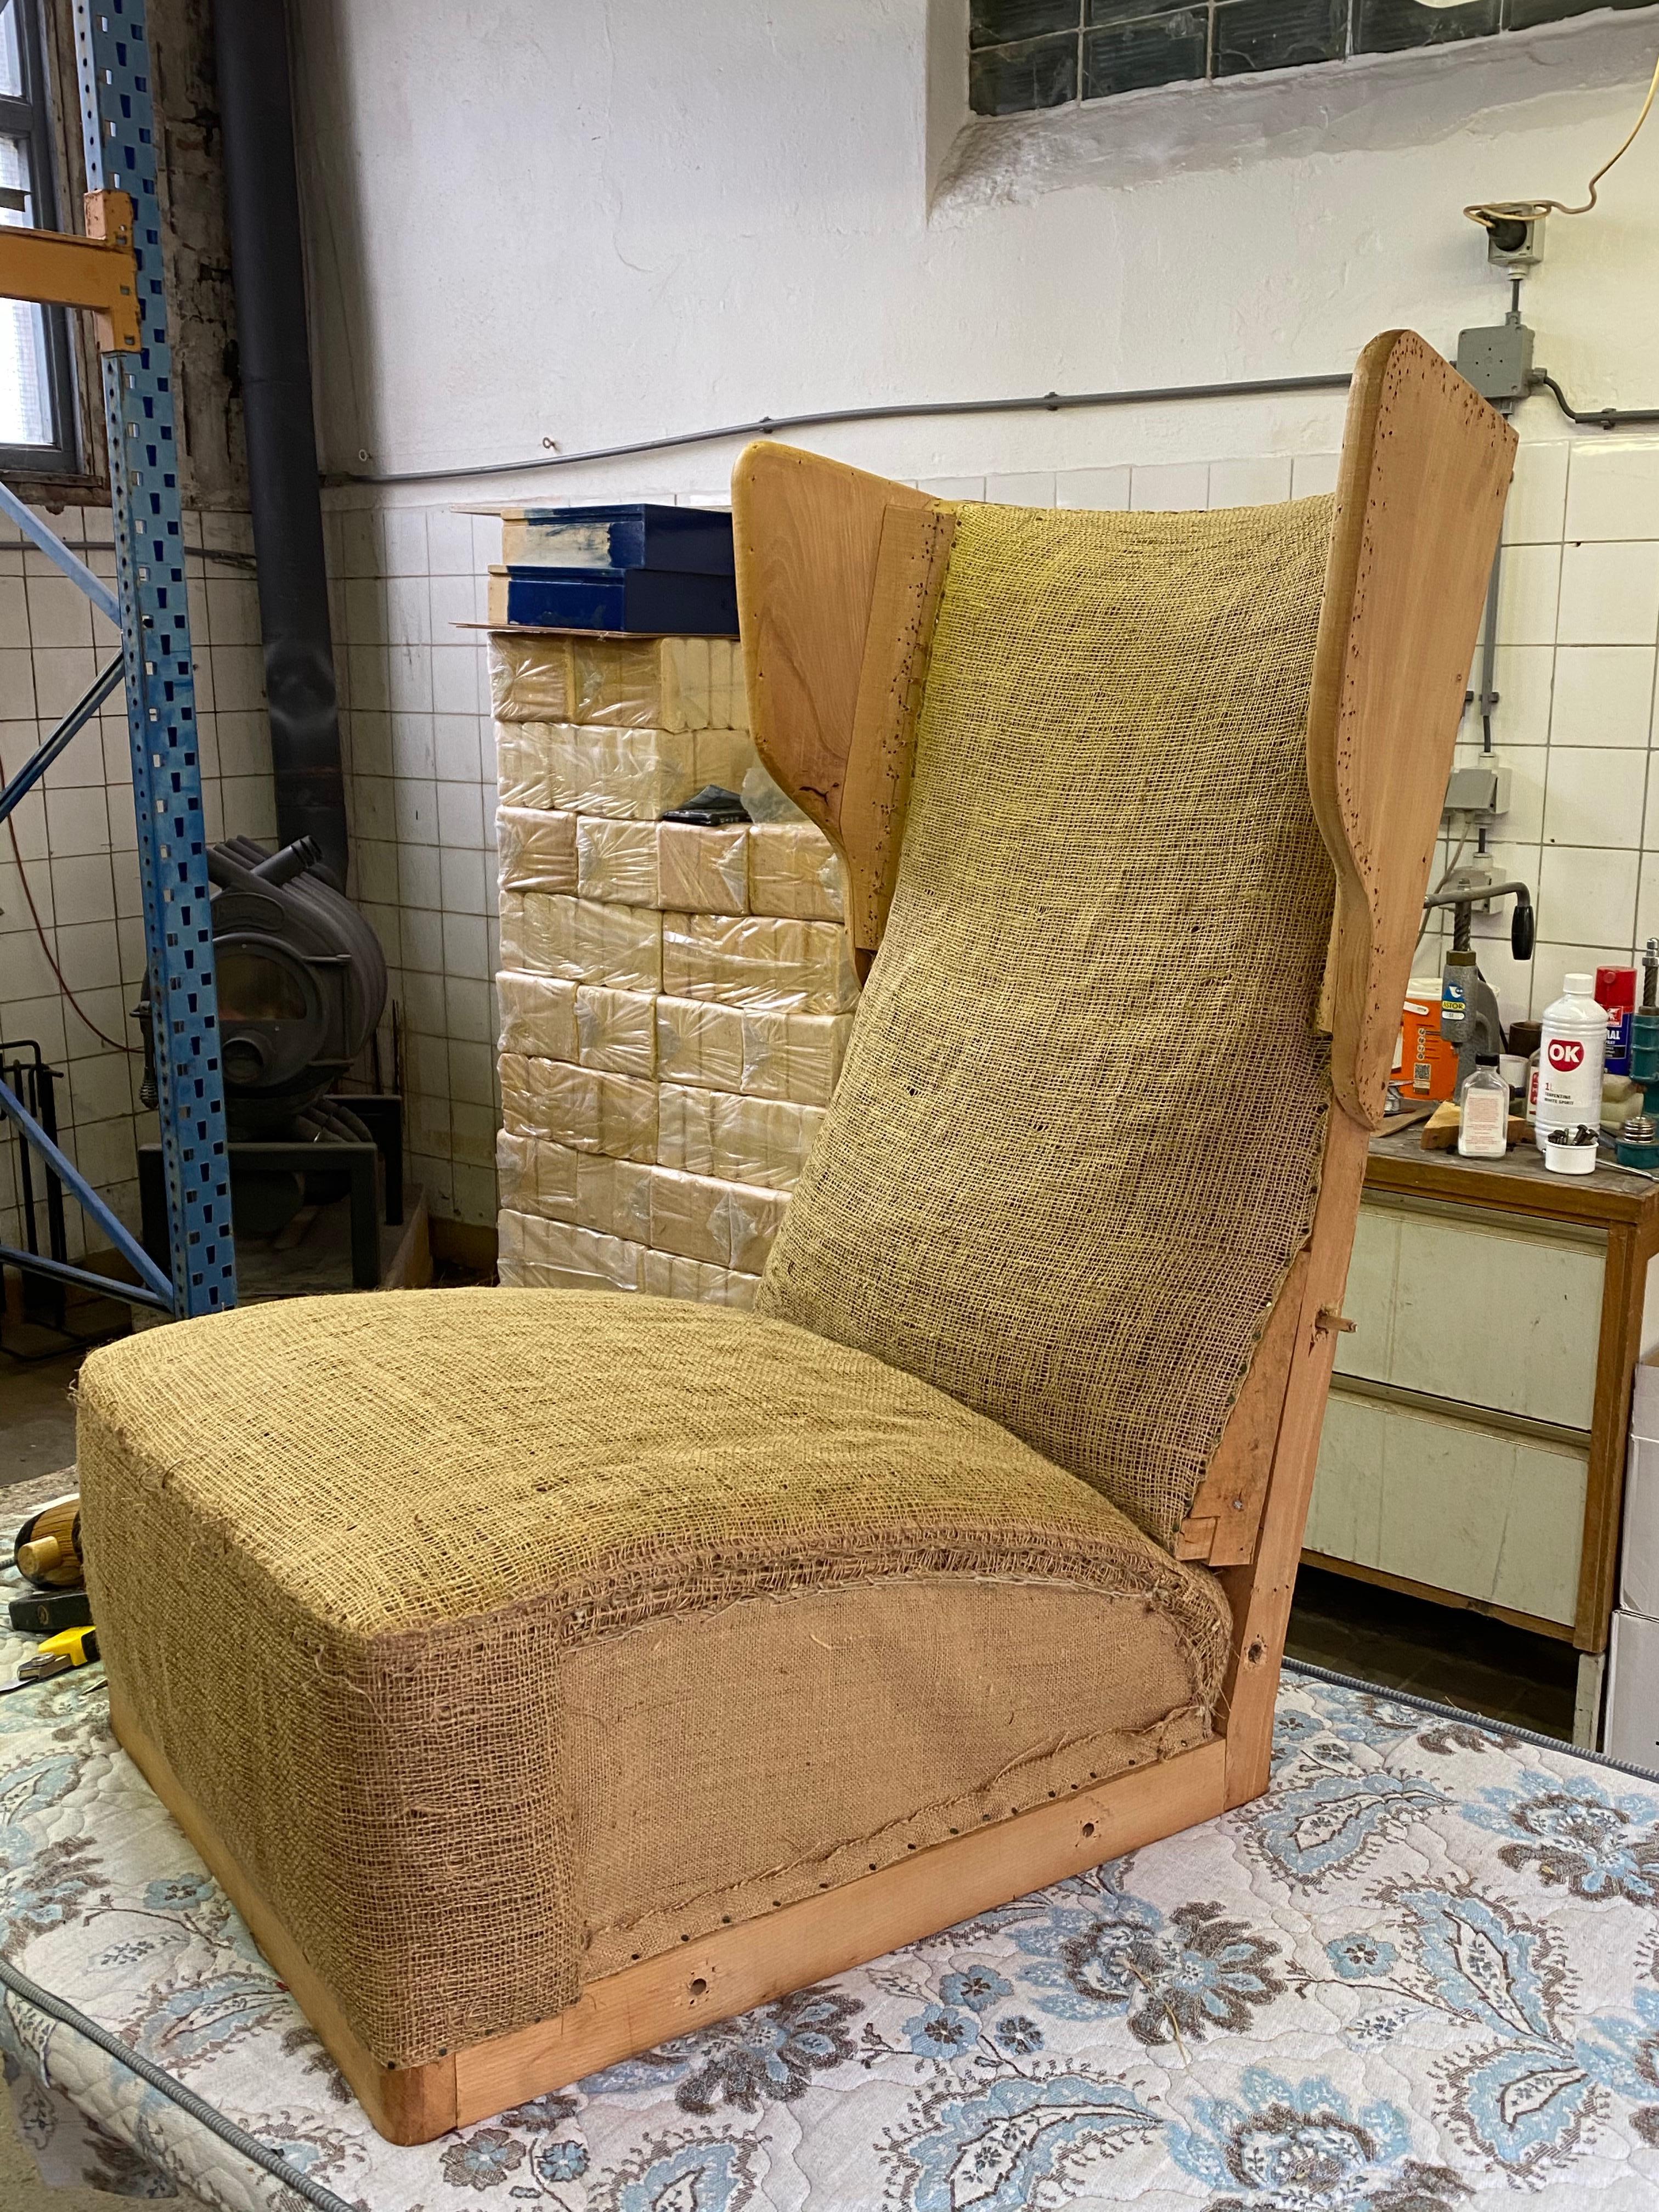 A pair of Swedish 1950s lounge chairs

All the wood is Birch

The chairs were made by skilled craftsmen and upholstery professionals with the Classic upholstery techniques used in the 1950s and made to last (see photo 2 of the stripped wingback